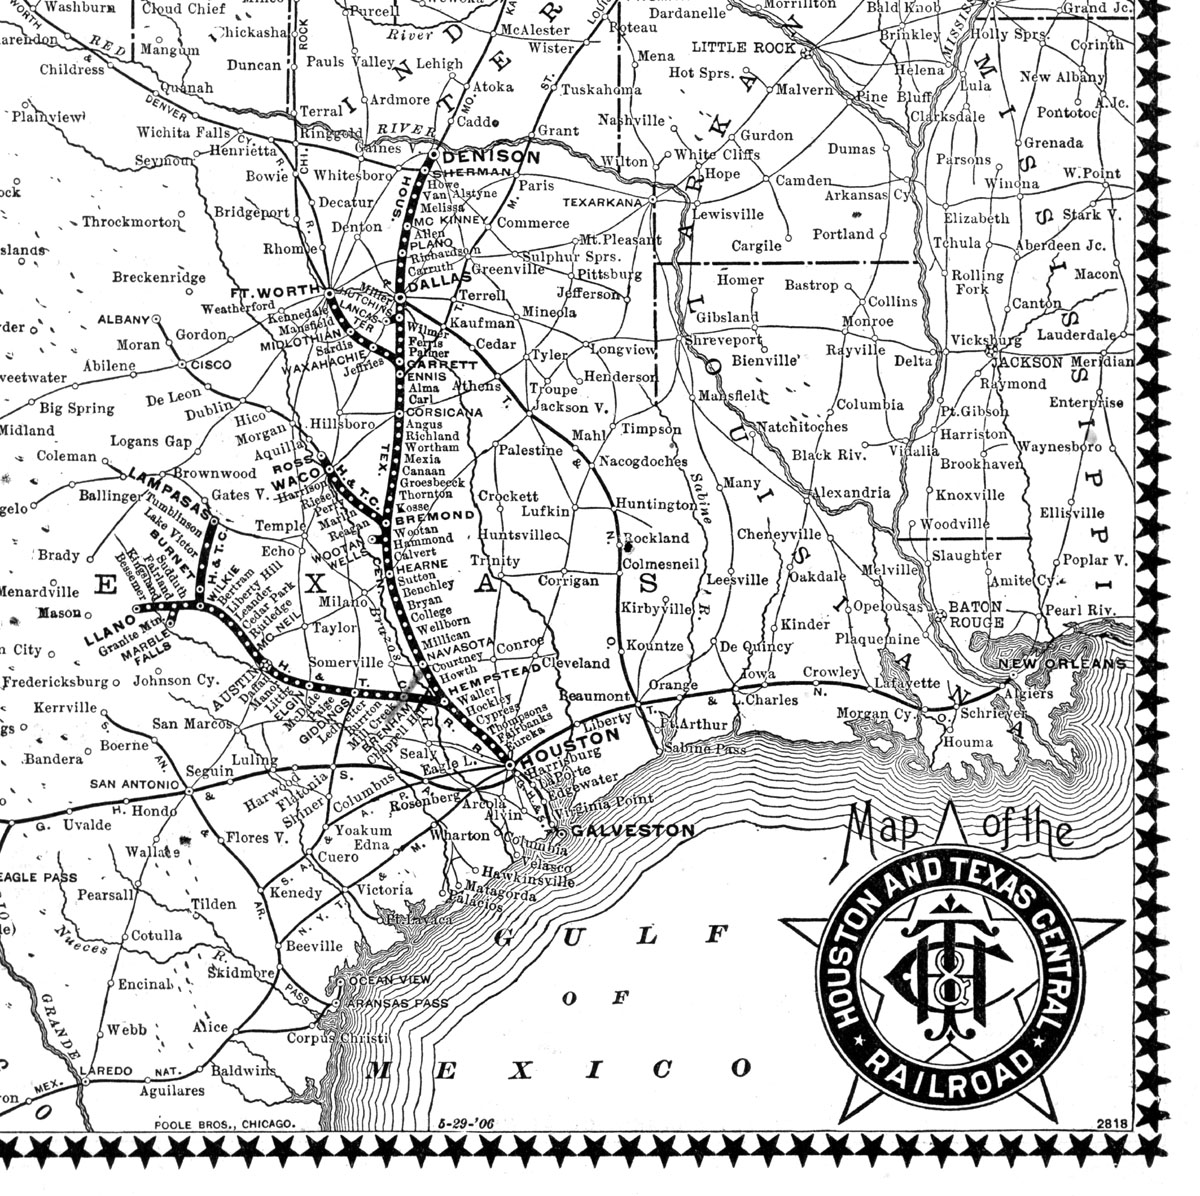 Houston-Texas-Central_1906_Official-Guide